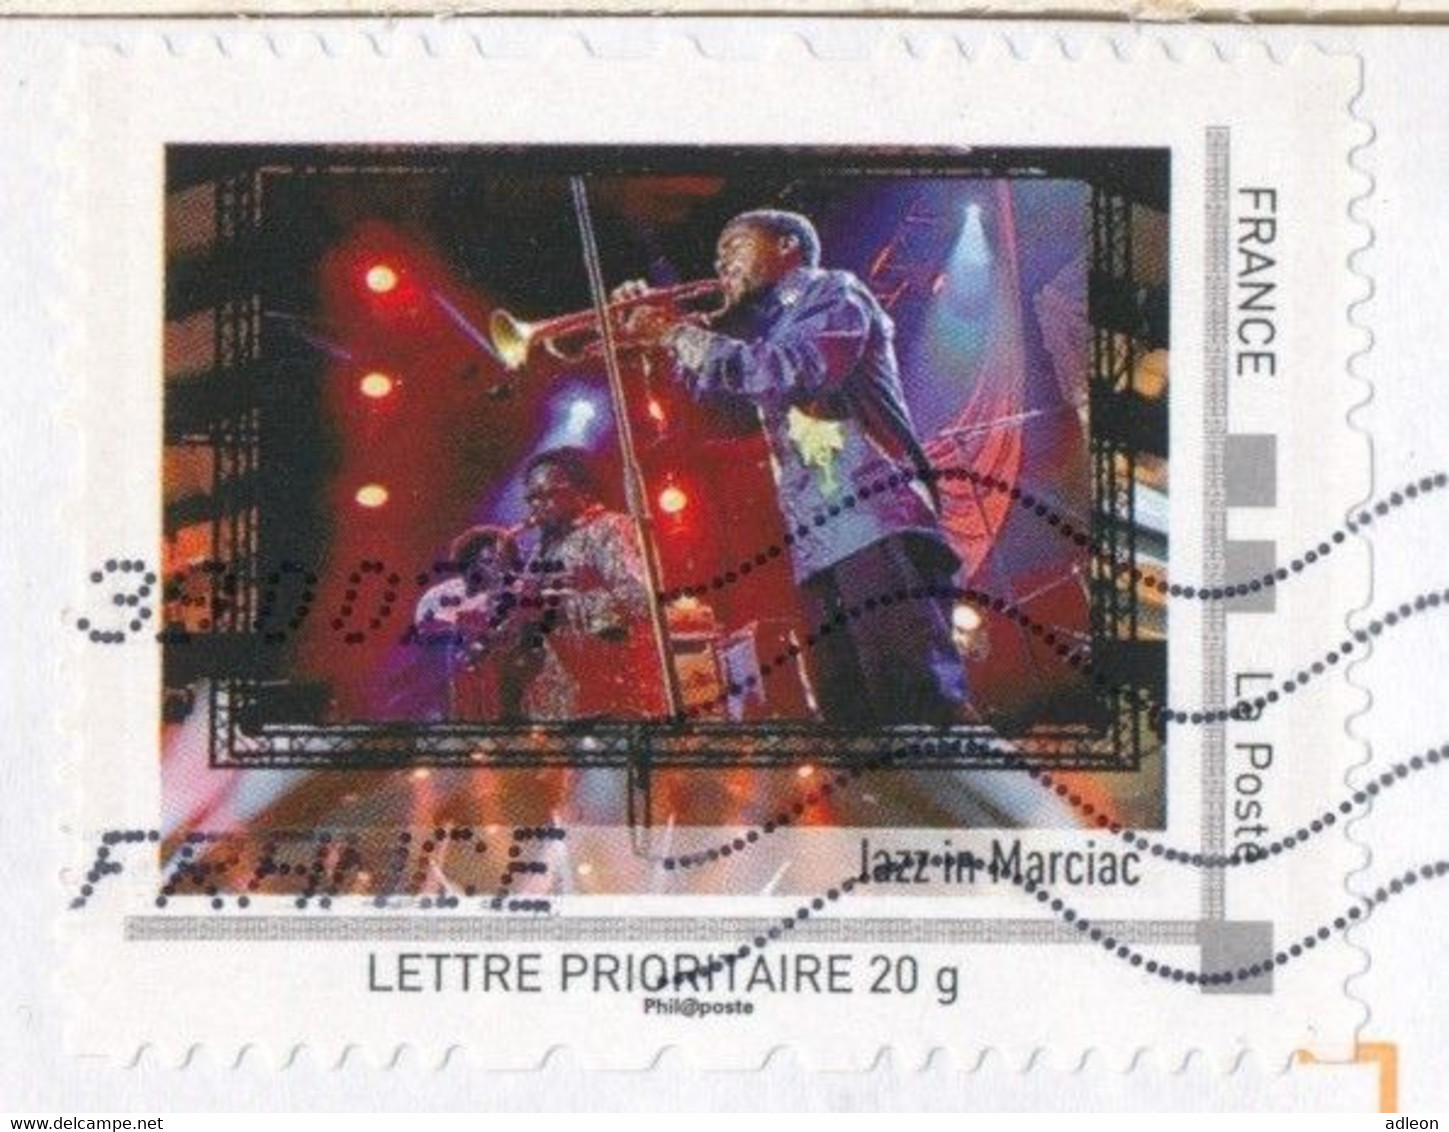 France-IDTimbres - Jazz In Marciac - YT IDT 7 Sur Lettre Du 05-01-2011 - Covers & Documents